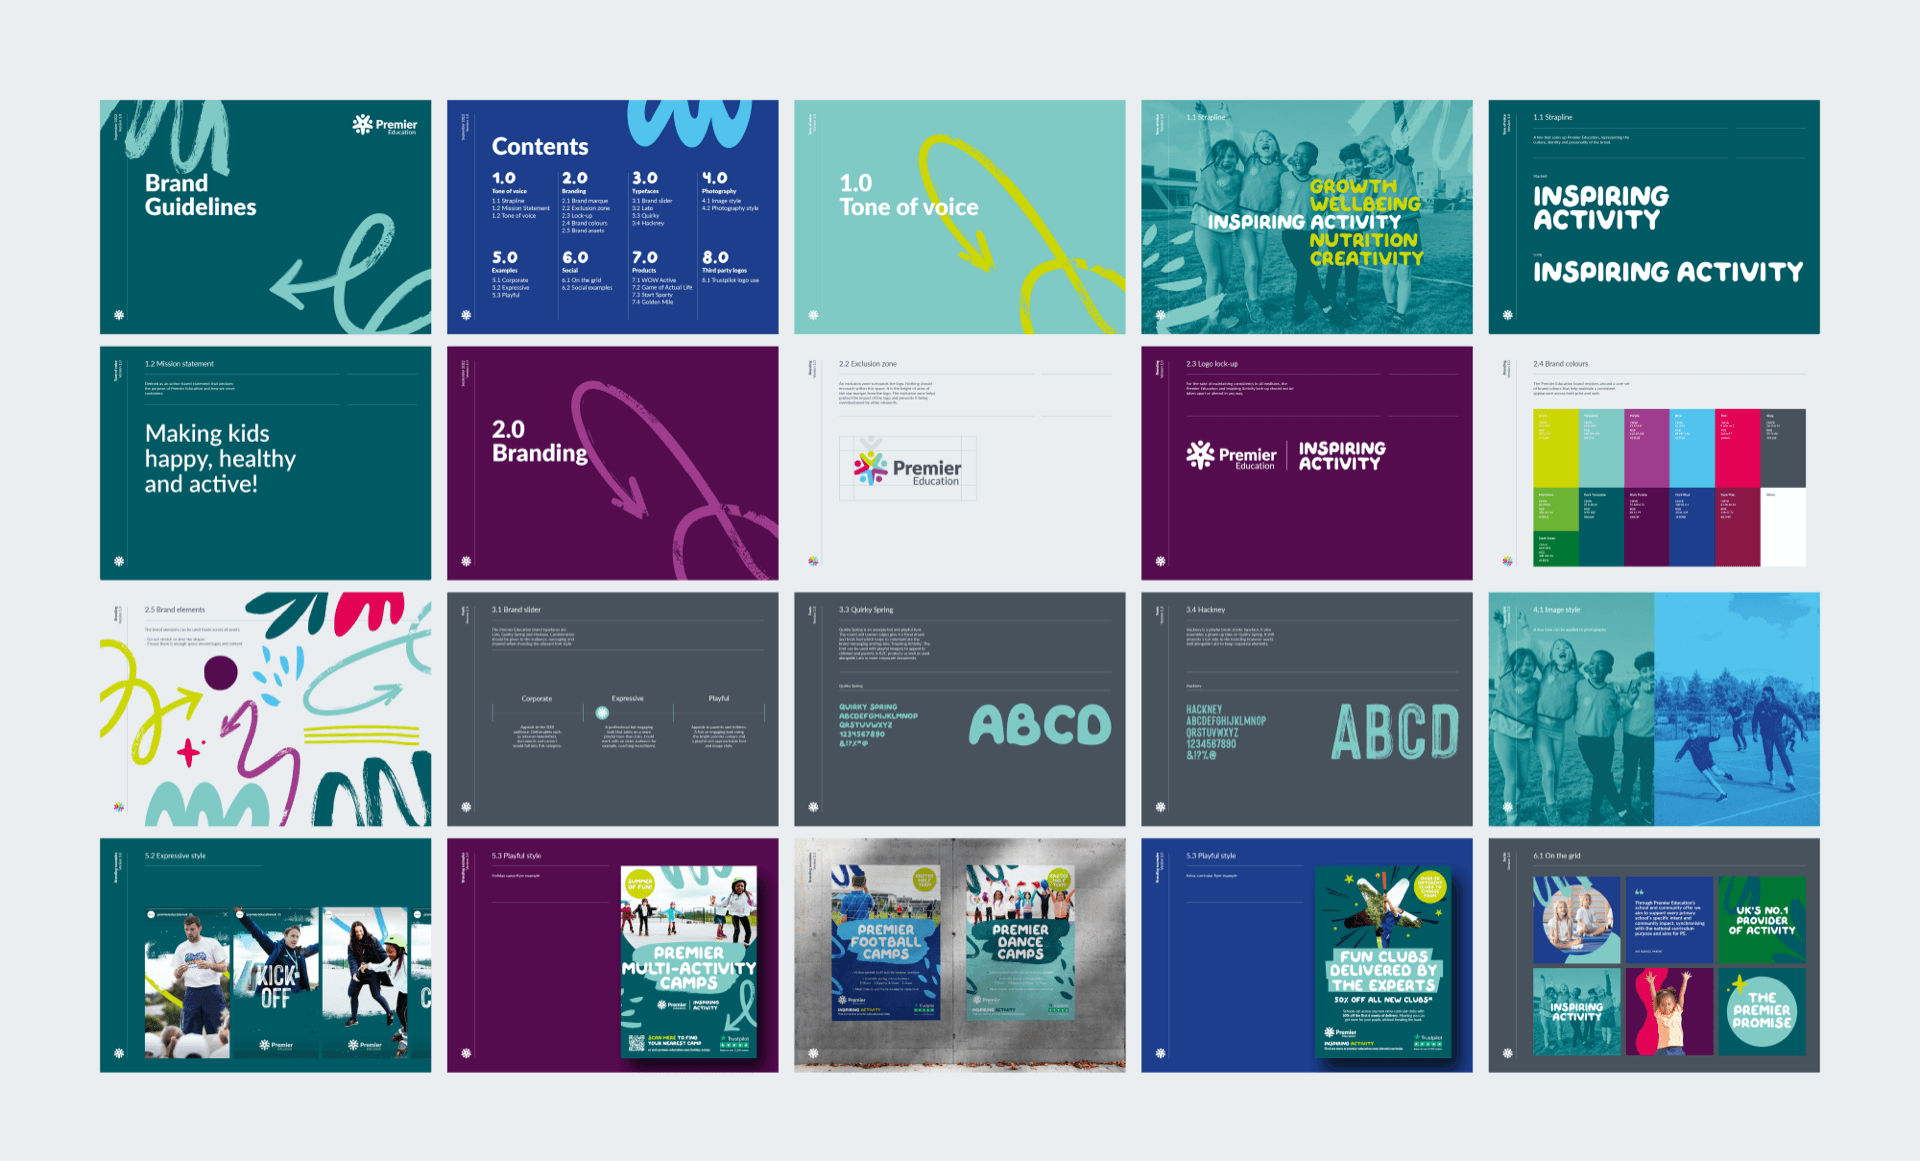 Premier Education Group brand guidelines designed by OneAgency.